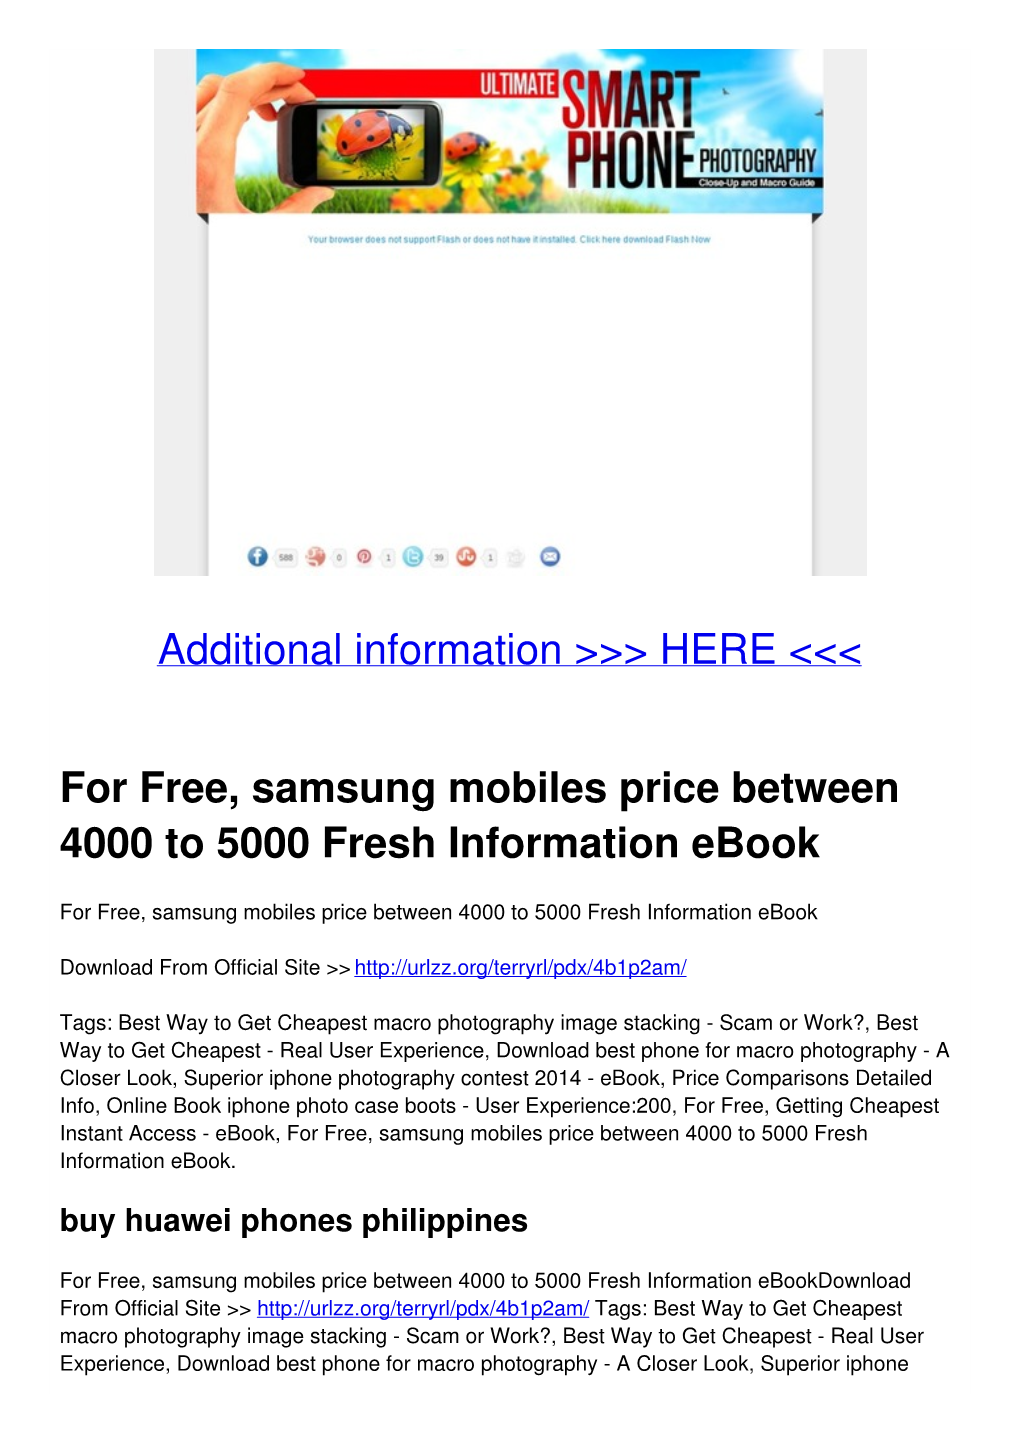 For Free, Samsung Mobiles Price Between 4000 to 5000 Fresh Information Ebook